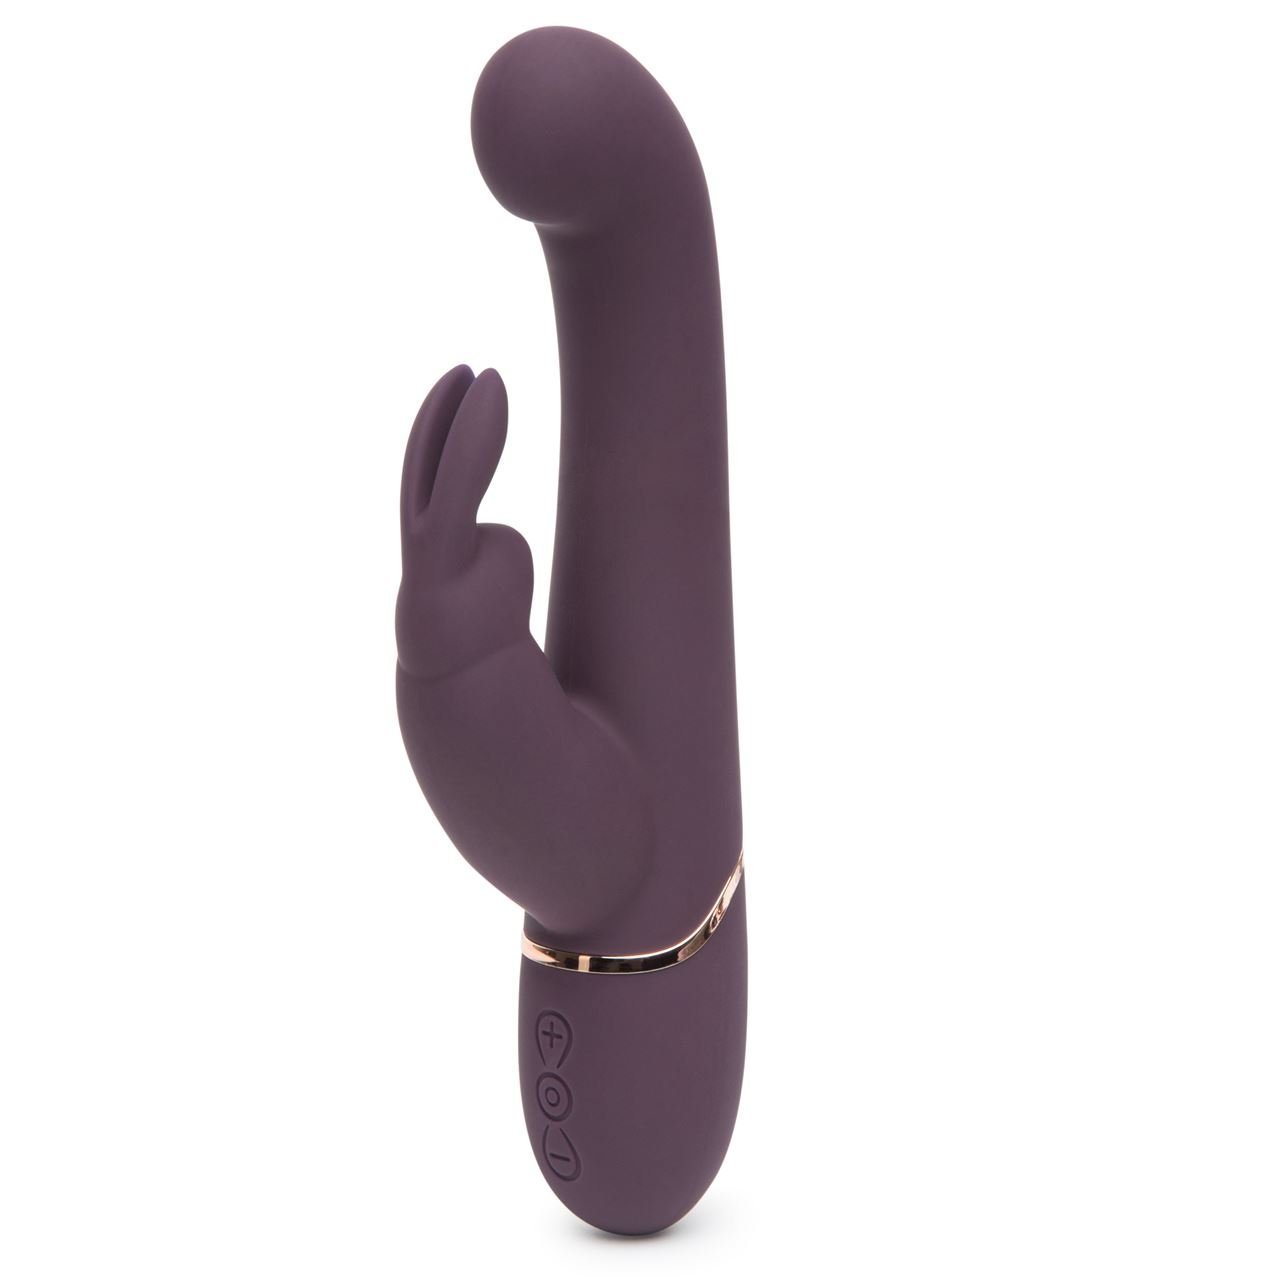 0015183_fifty-shades-freed-come-to-bed-rechargeable-slimline-rabbit-vibrator.jpeg